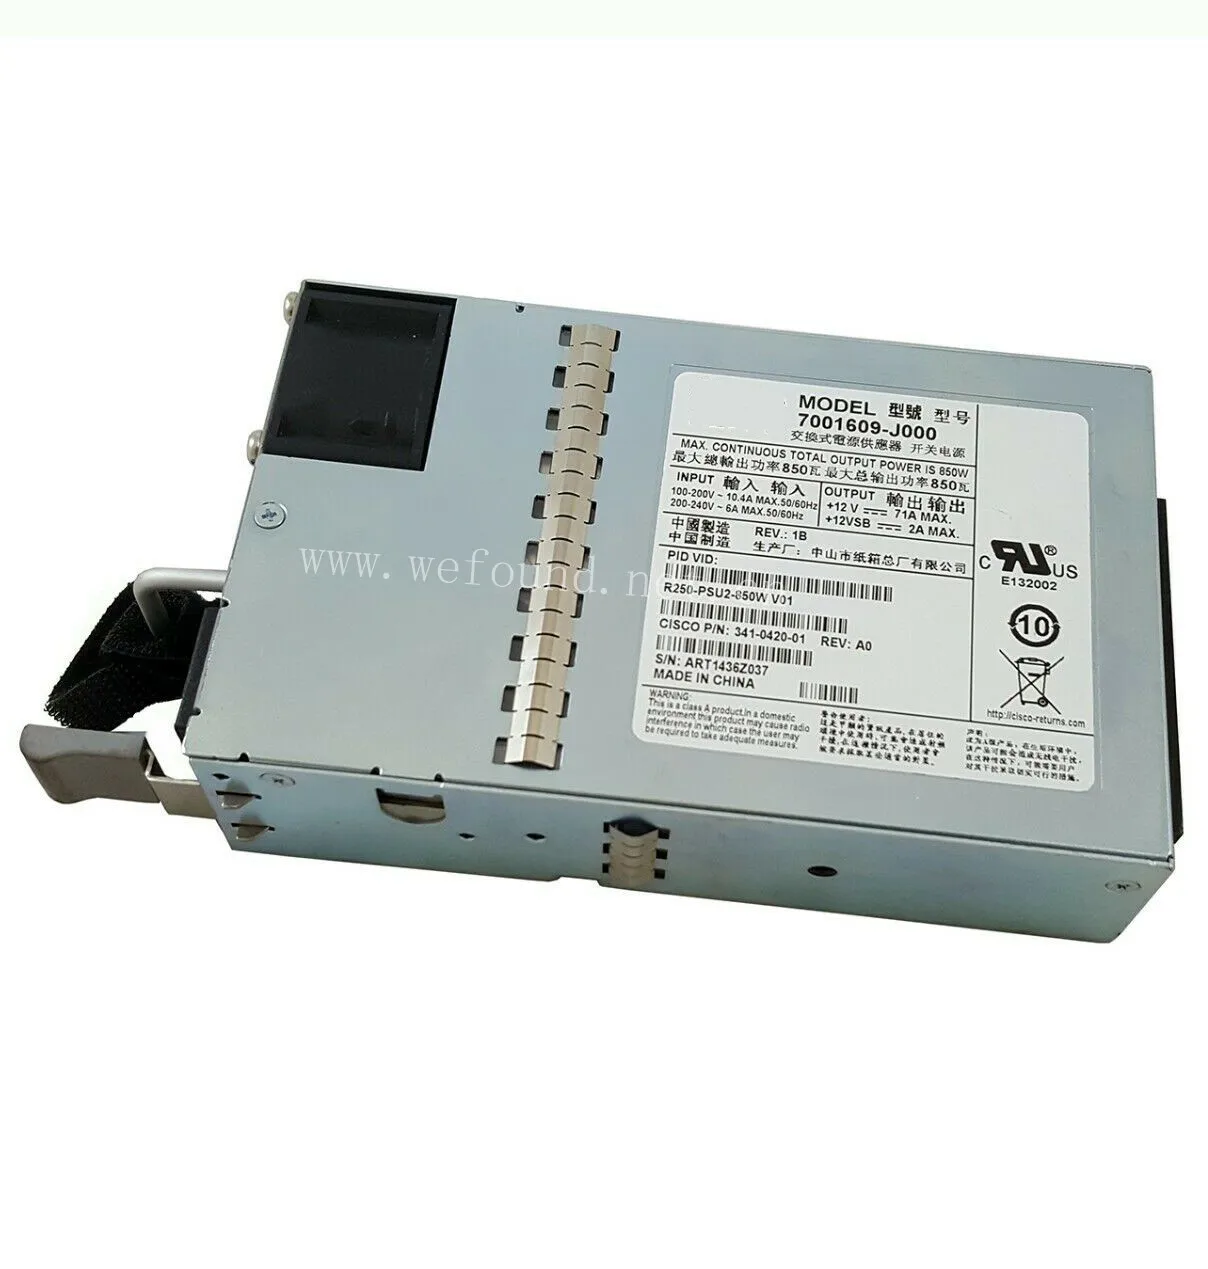 100% Test For Power Supply For R250-PSU2-850W 341-0420-01 C250 7001609-J000 Work Good